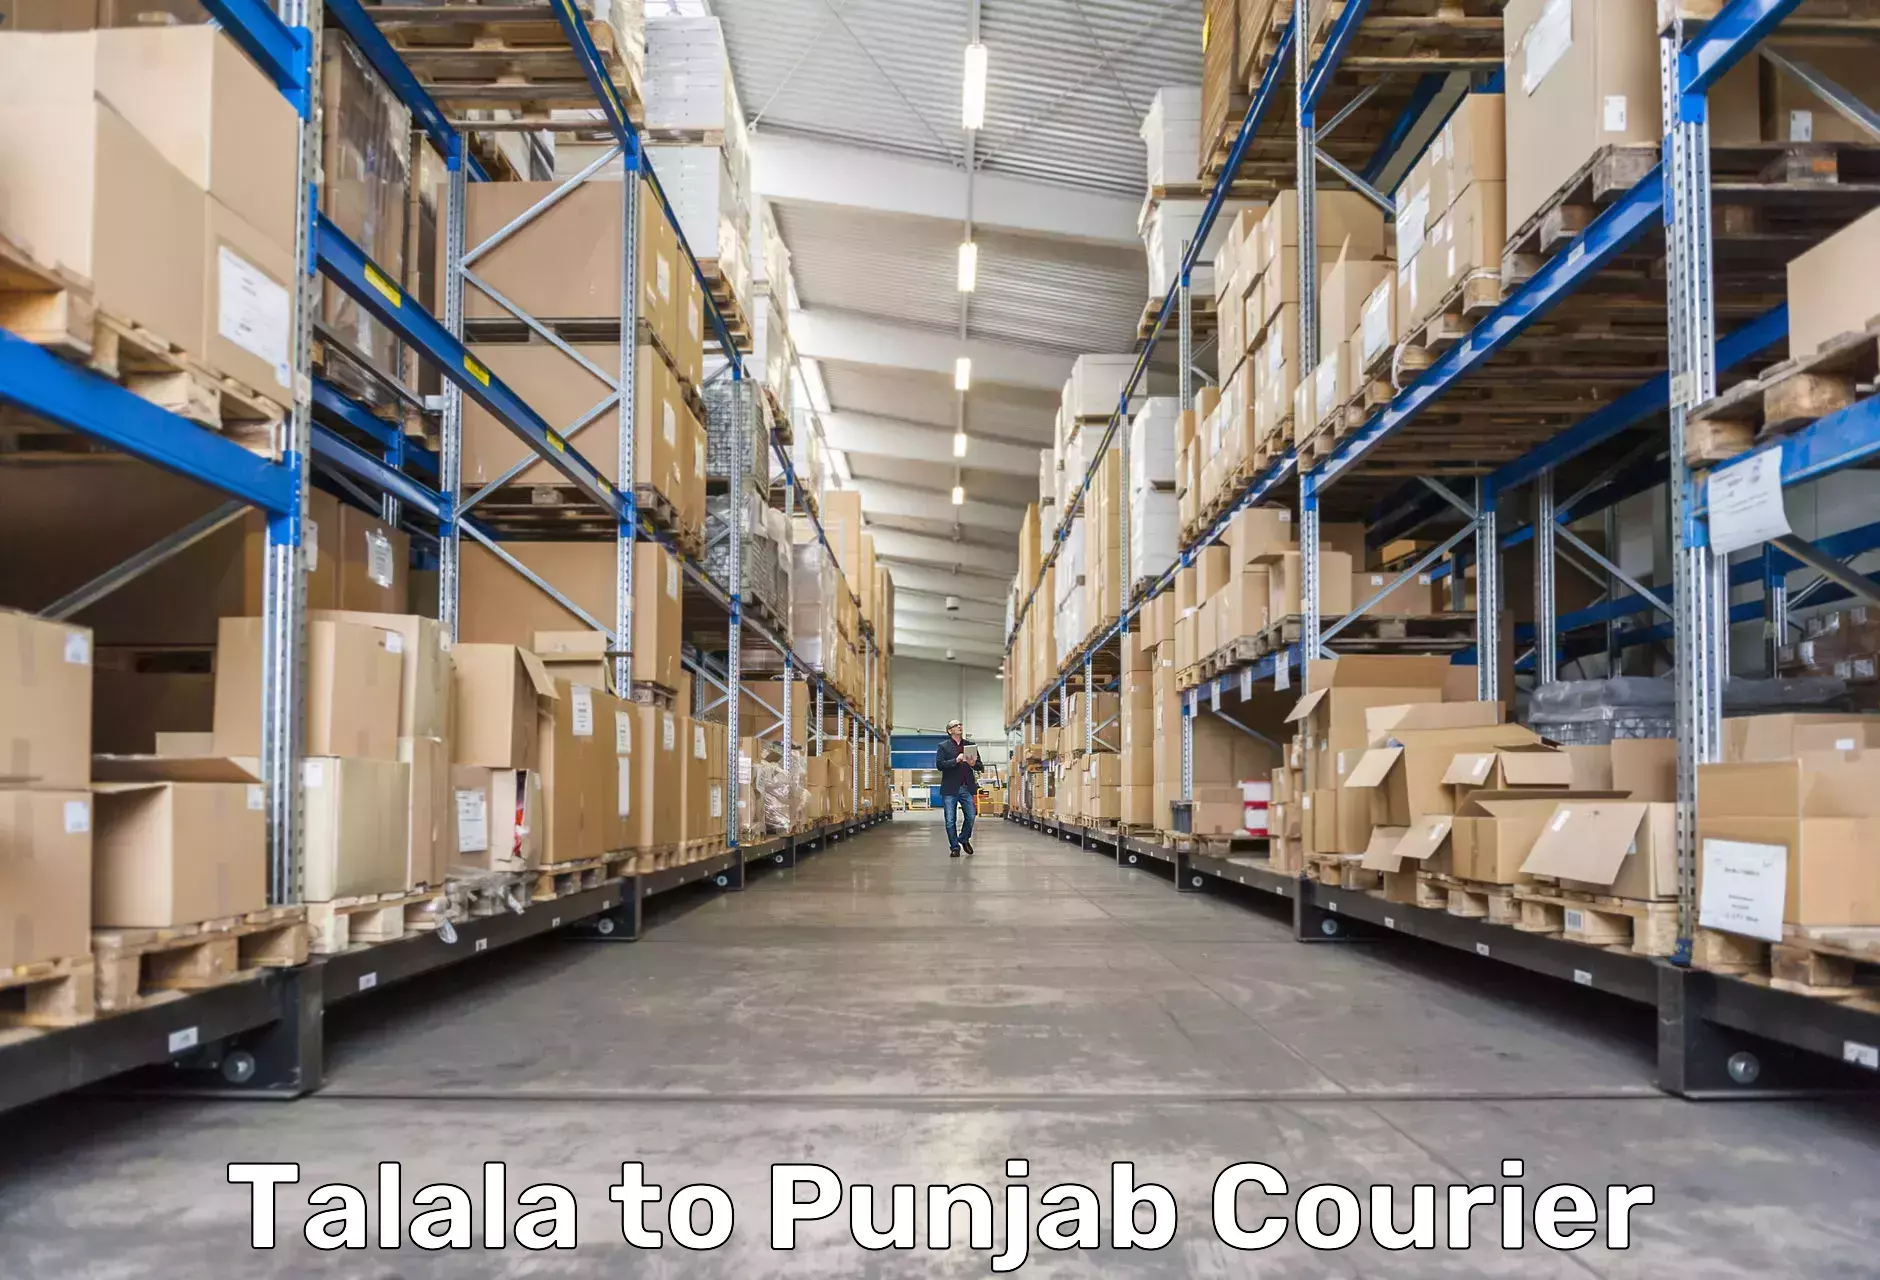 Express delivery capabilities Talala to Punjab